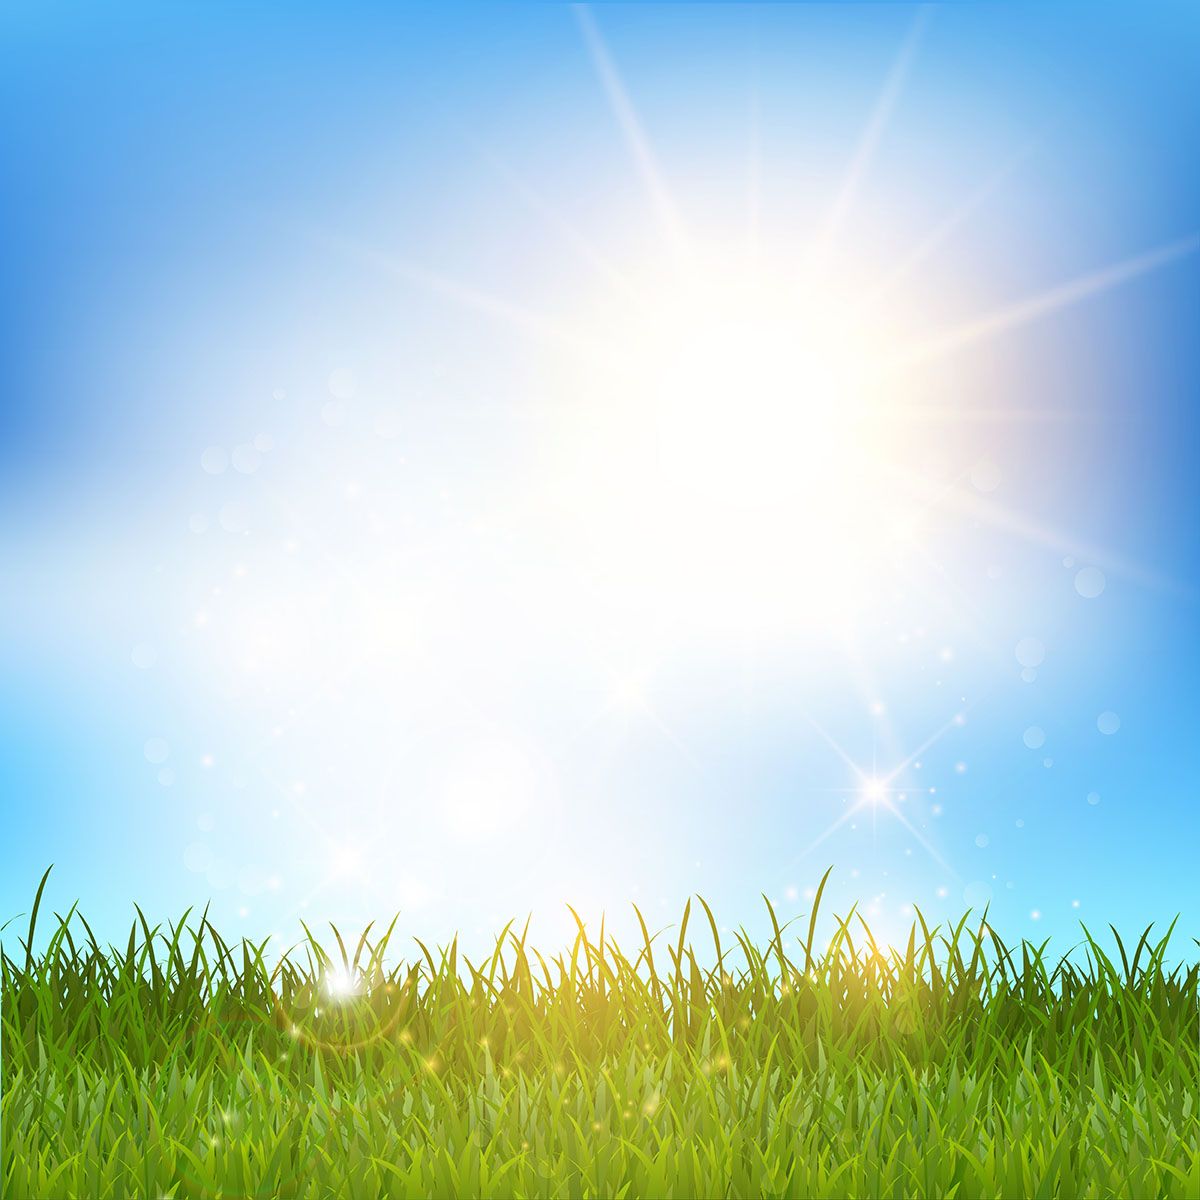 Blue sky and grass landscape. Background for photography, Free spring wallpaper, Grass landscape